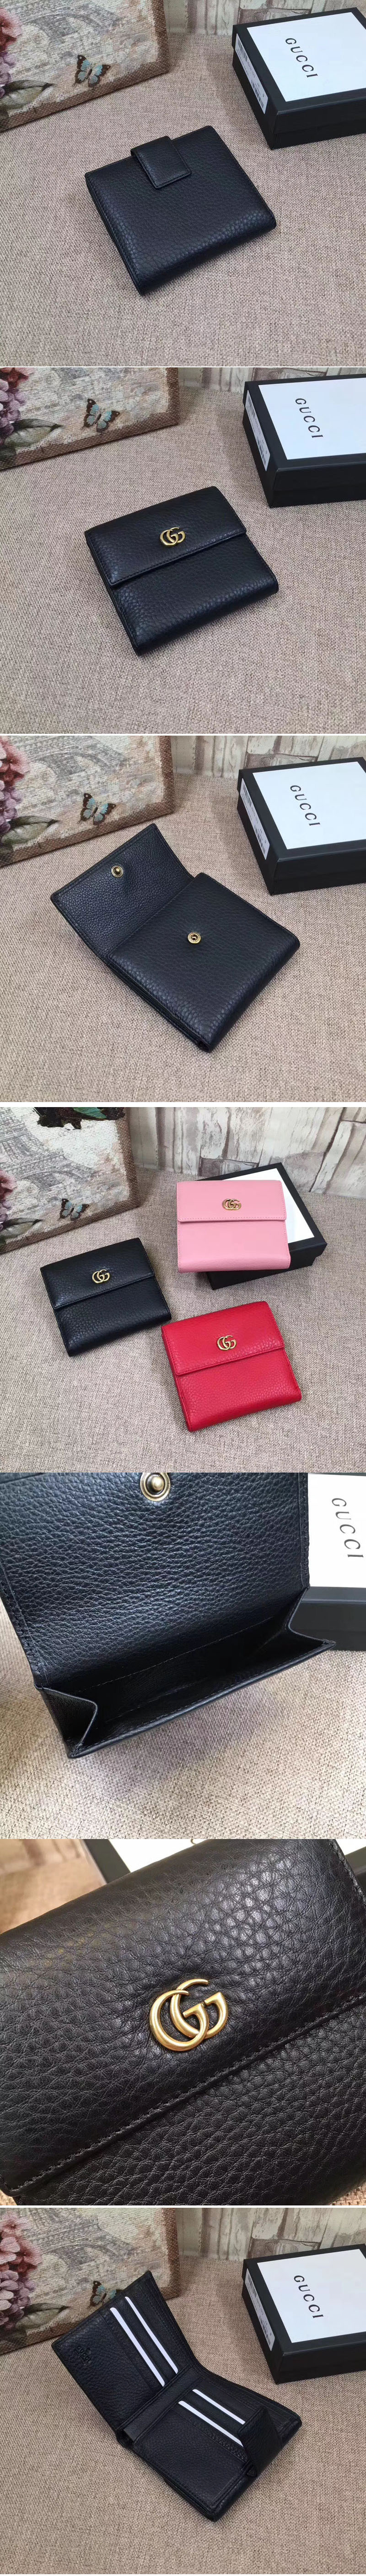 Replica Gucci 456122 Leather french flap wallet Black